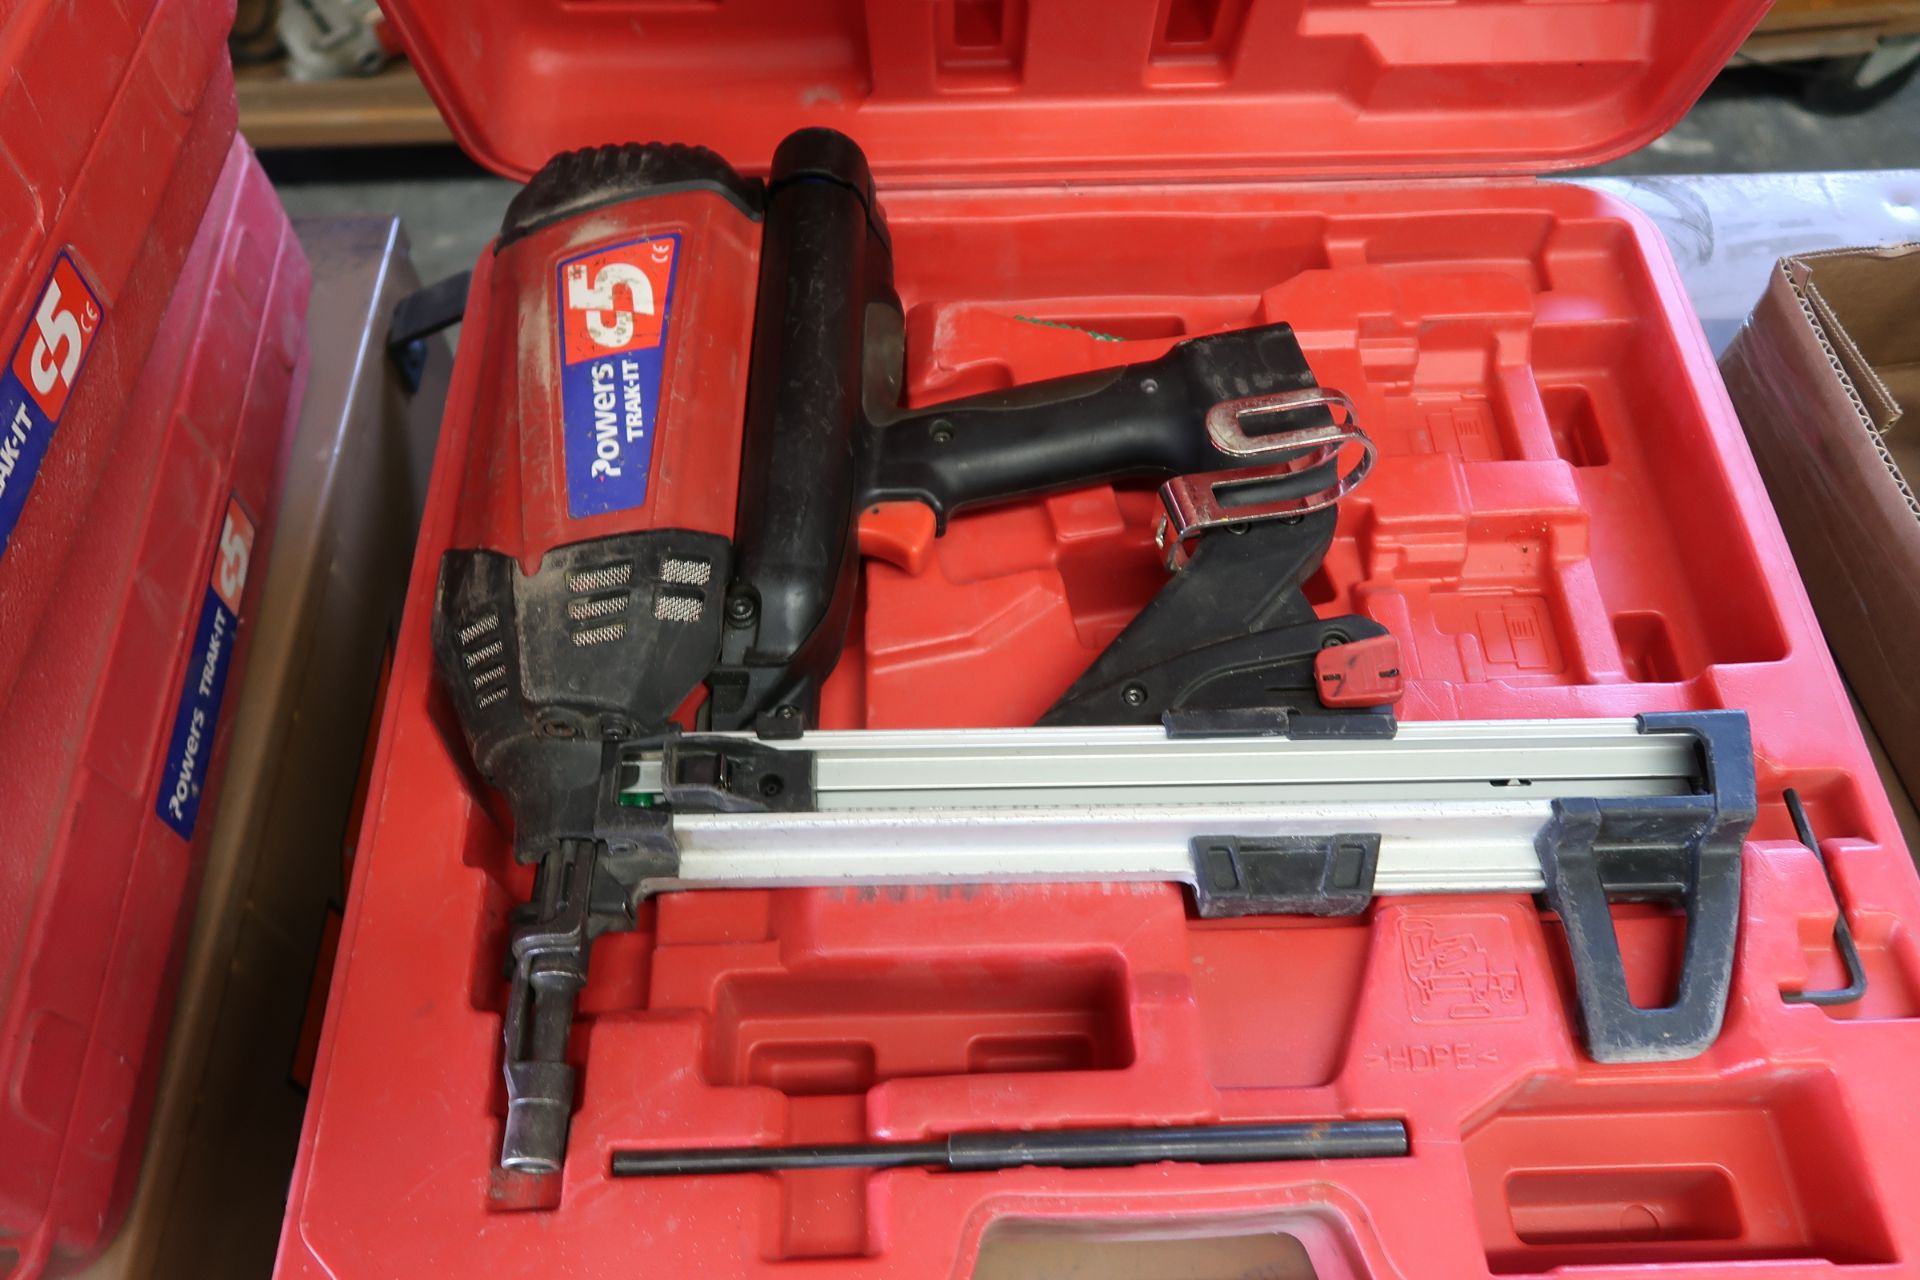 Powers "Trak-It C5" Cordless Nailers (2 - NO BATTERIES OR CHARGERS) (SOLD AS-IS - NO WARRANTY) - Image 4 of 5